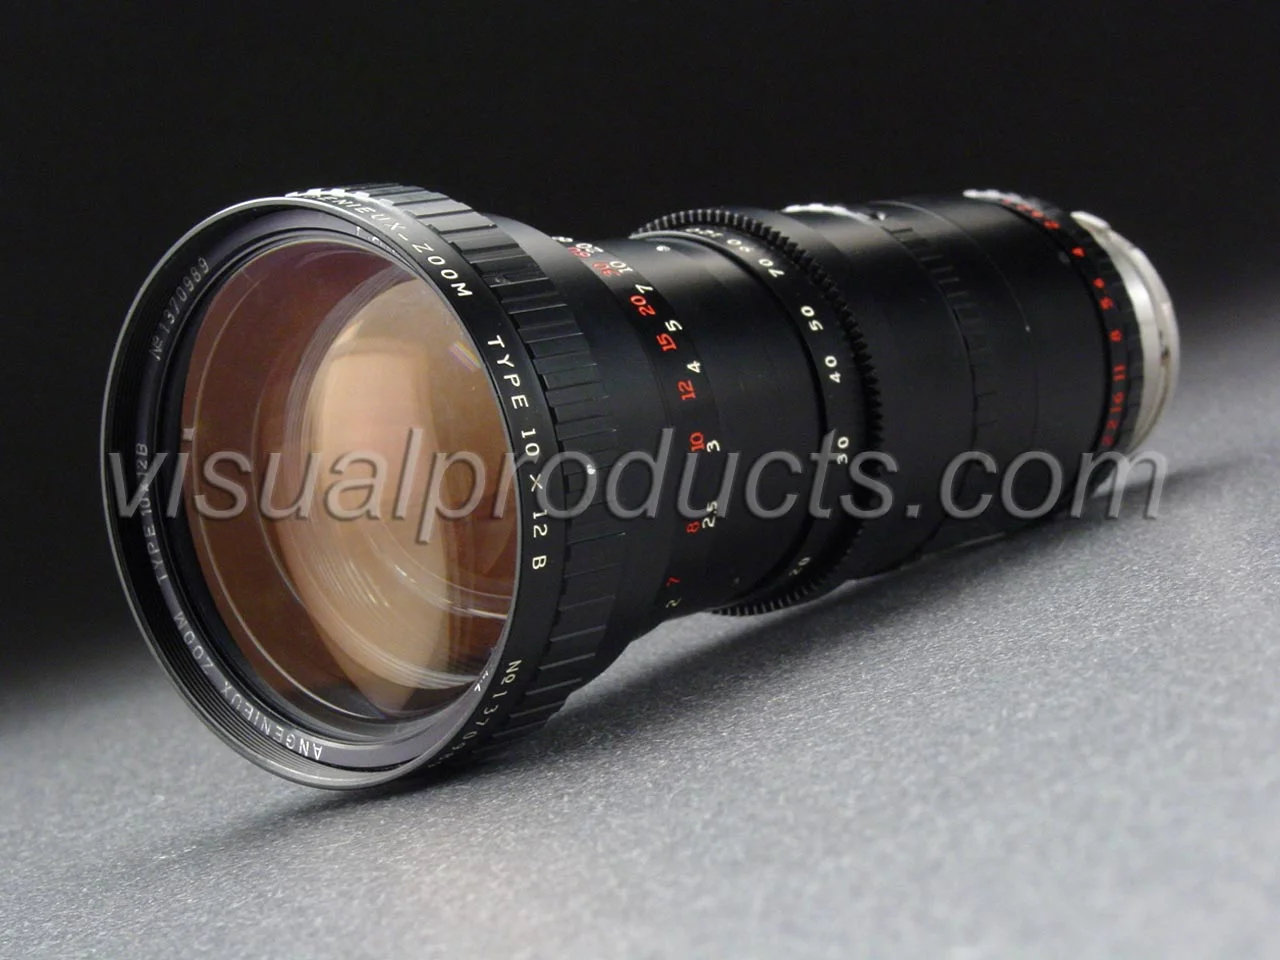 Angenieux 12-120mm T2.5 Zoom - Visual Products